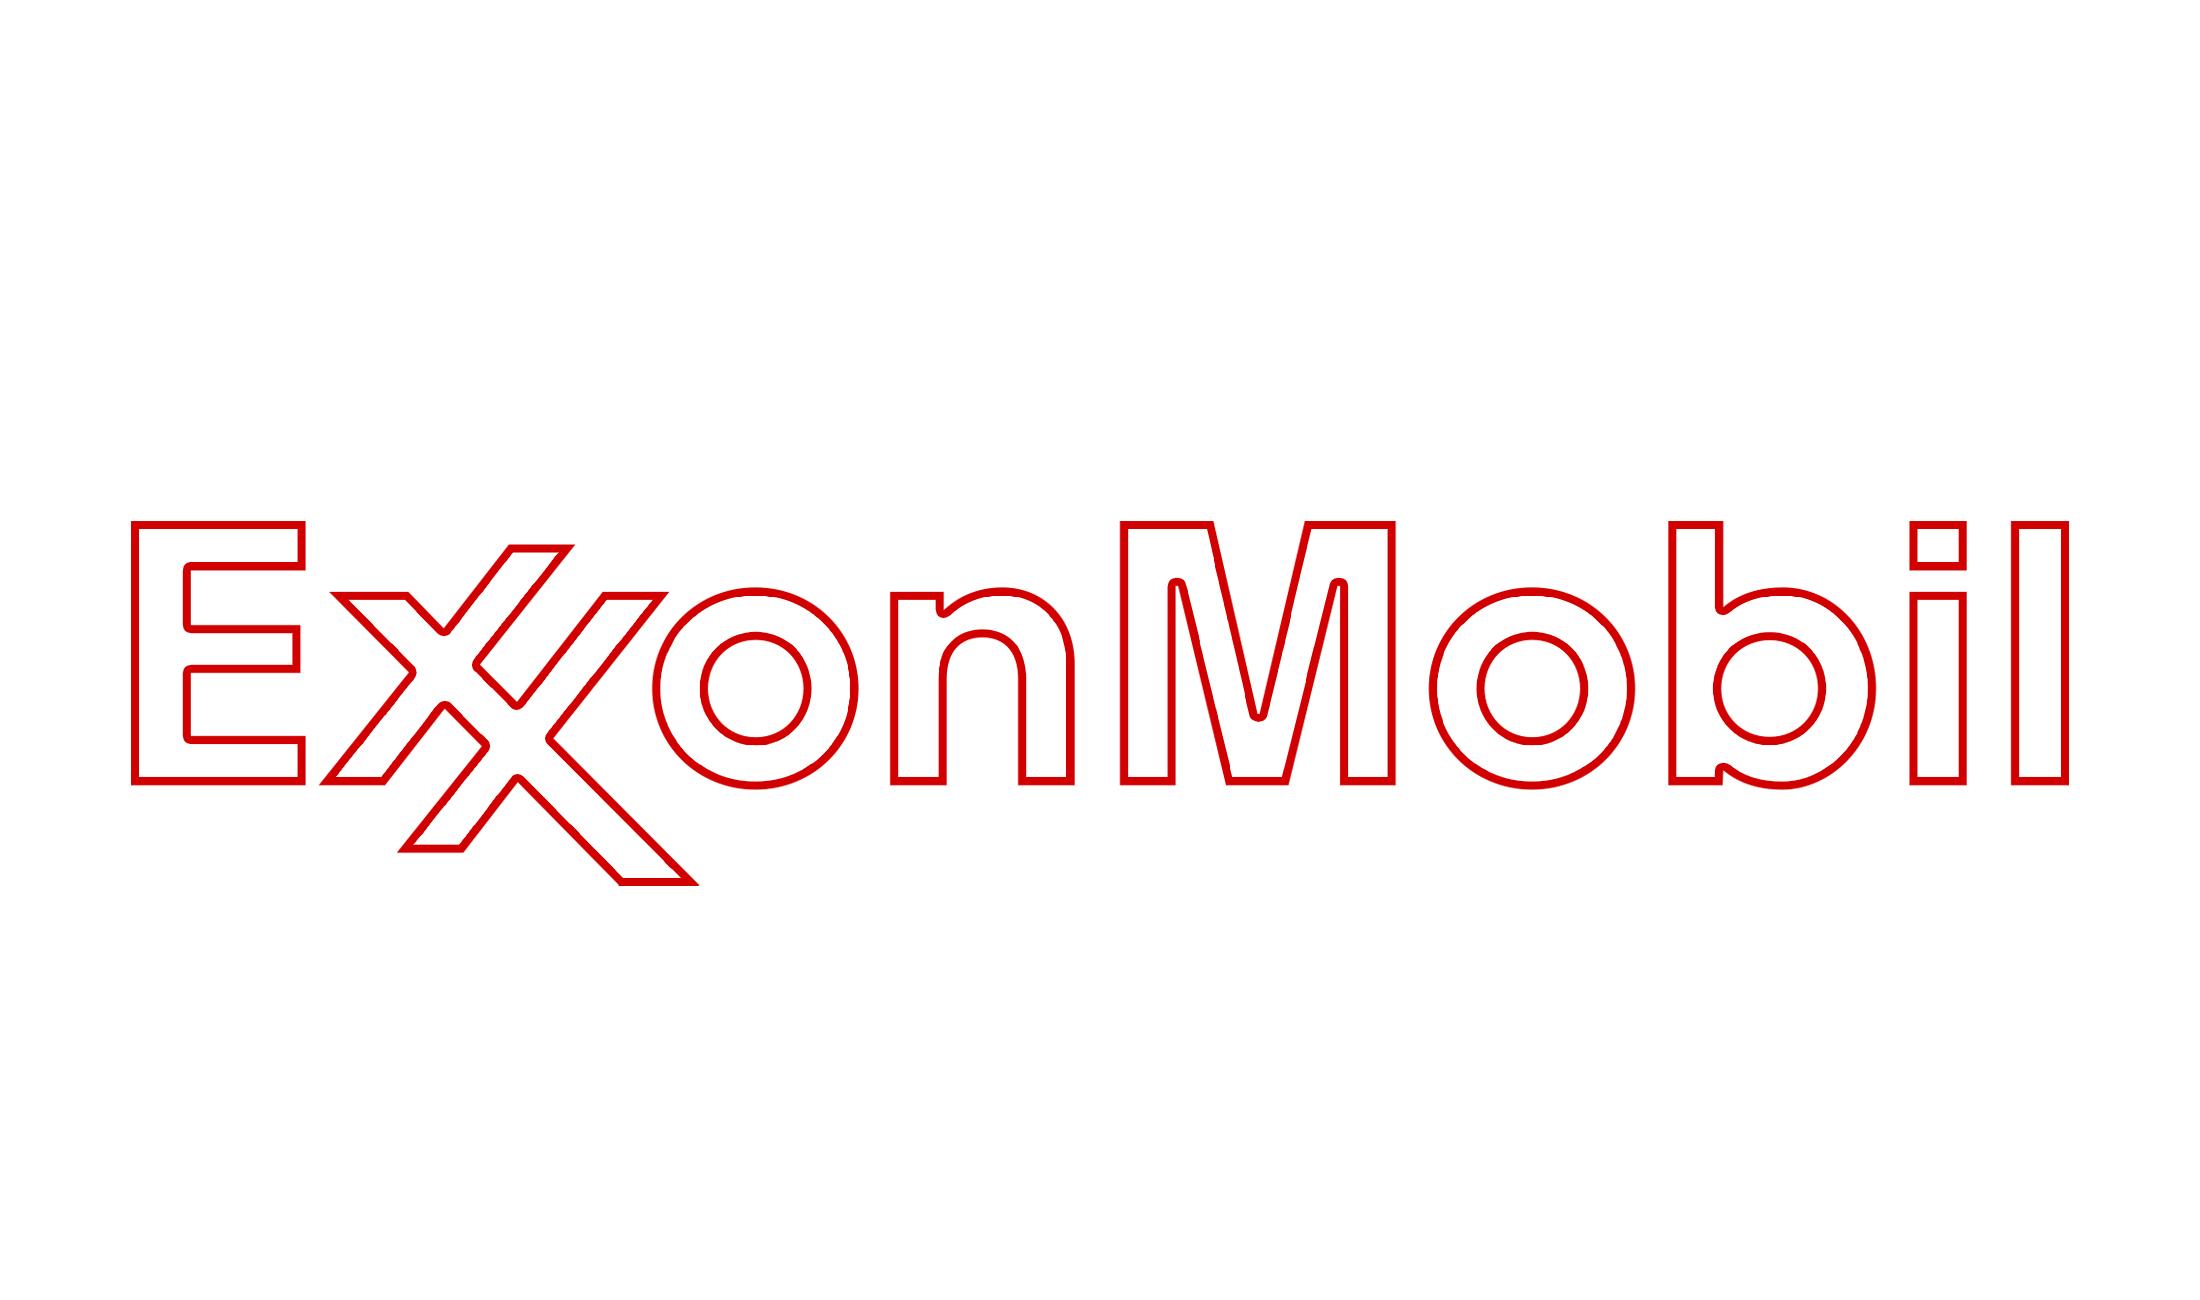 Exxon Mobil Logo - ExxonMobil Logo, ExxonMobil Symbol, Meaning, History and Evolution